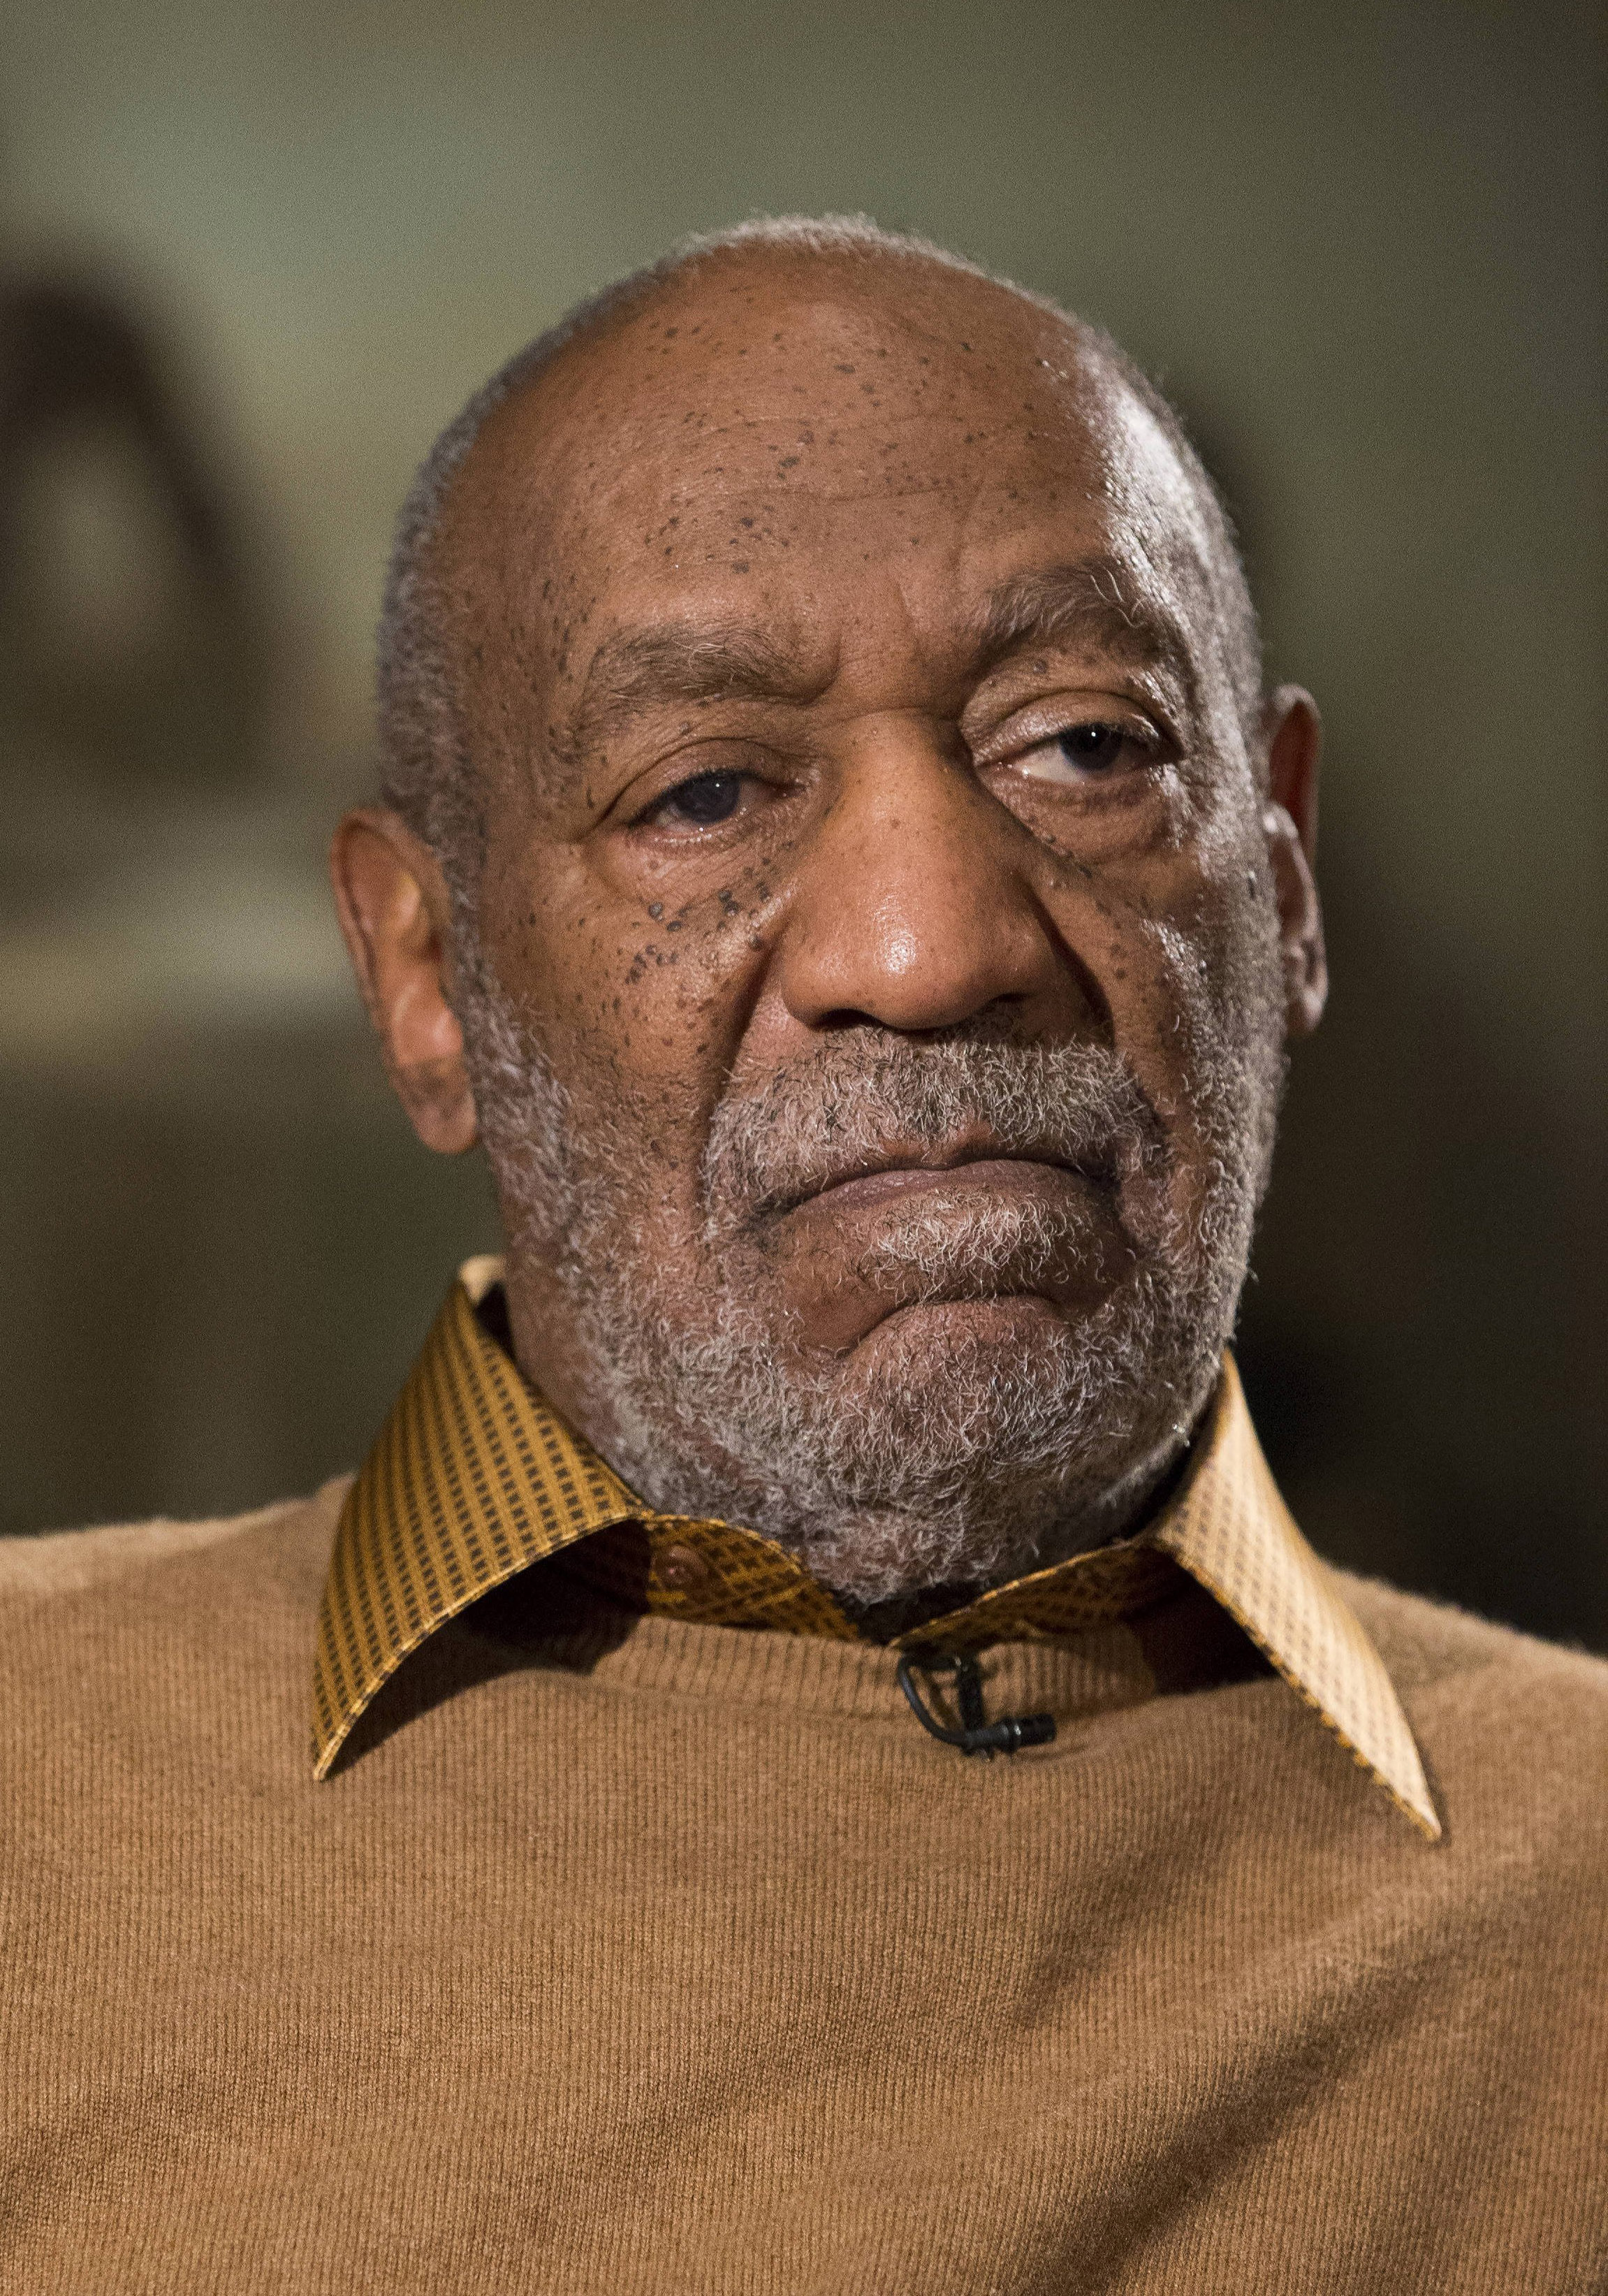 Bill Cosby during an interview about the upcoming exhibit, Conversations: African and African-American Artworks in Dialogue, at the Smithsonian's National Museum of African Art in Washington. ON NOV. 6, 2014.